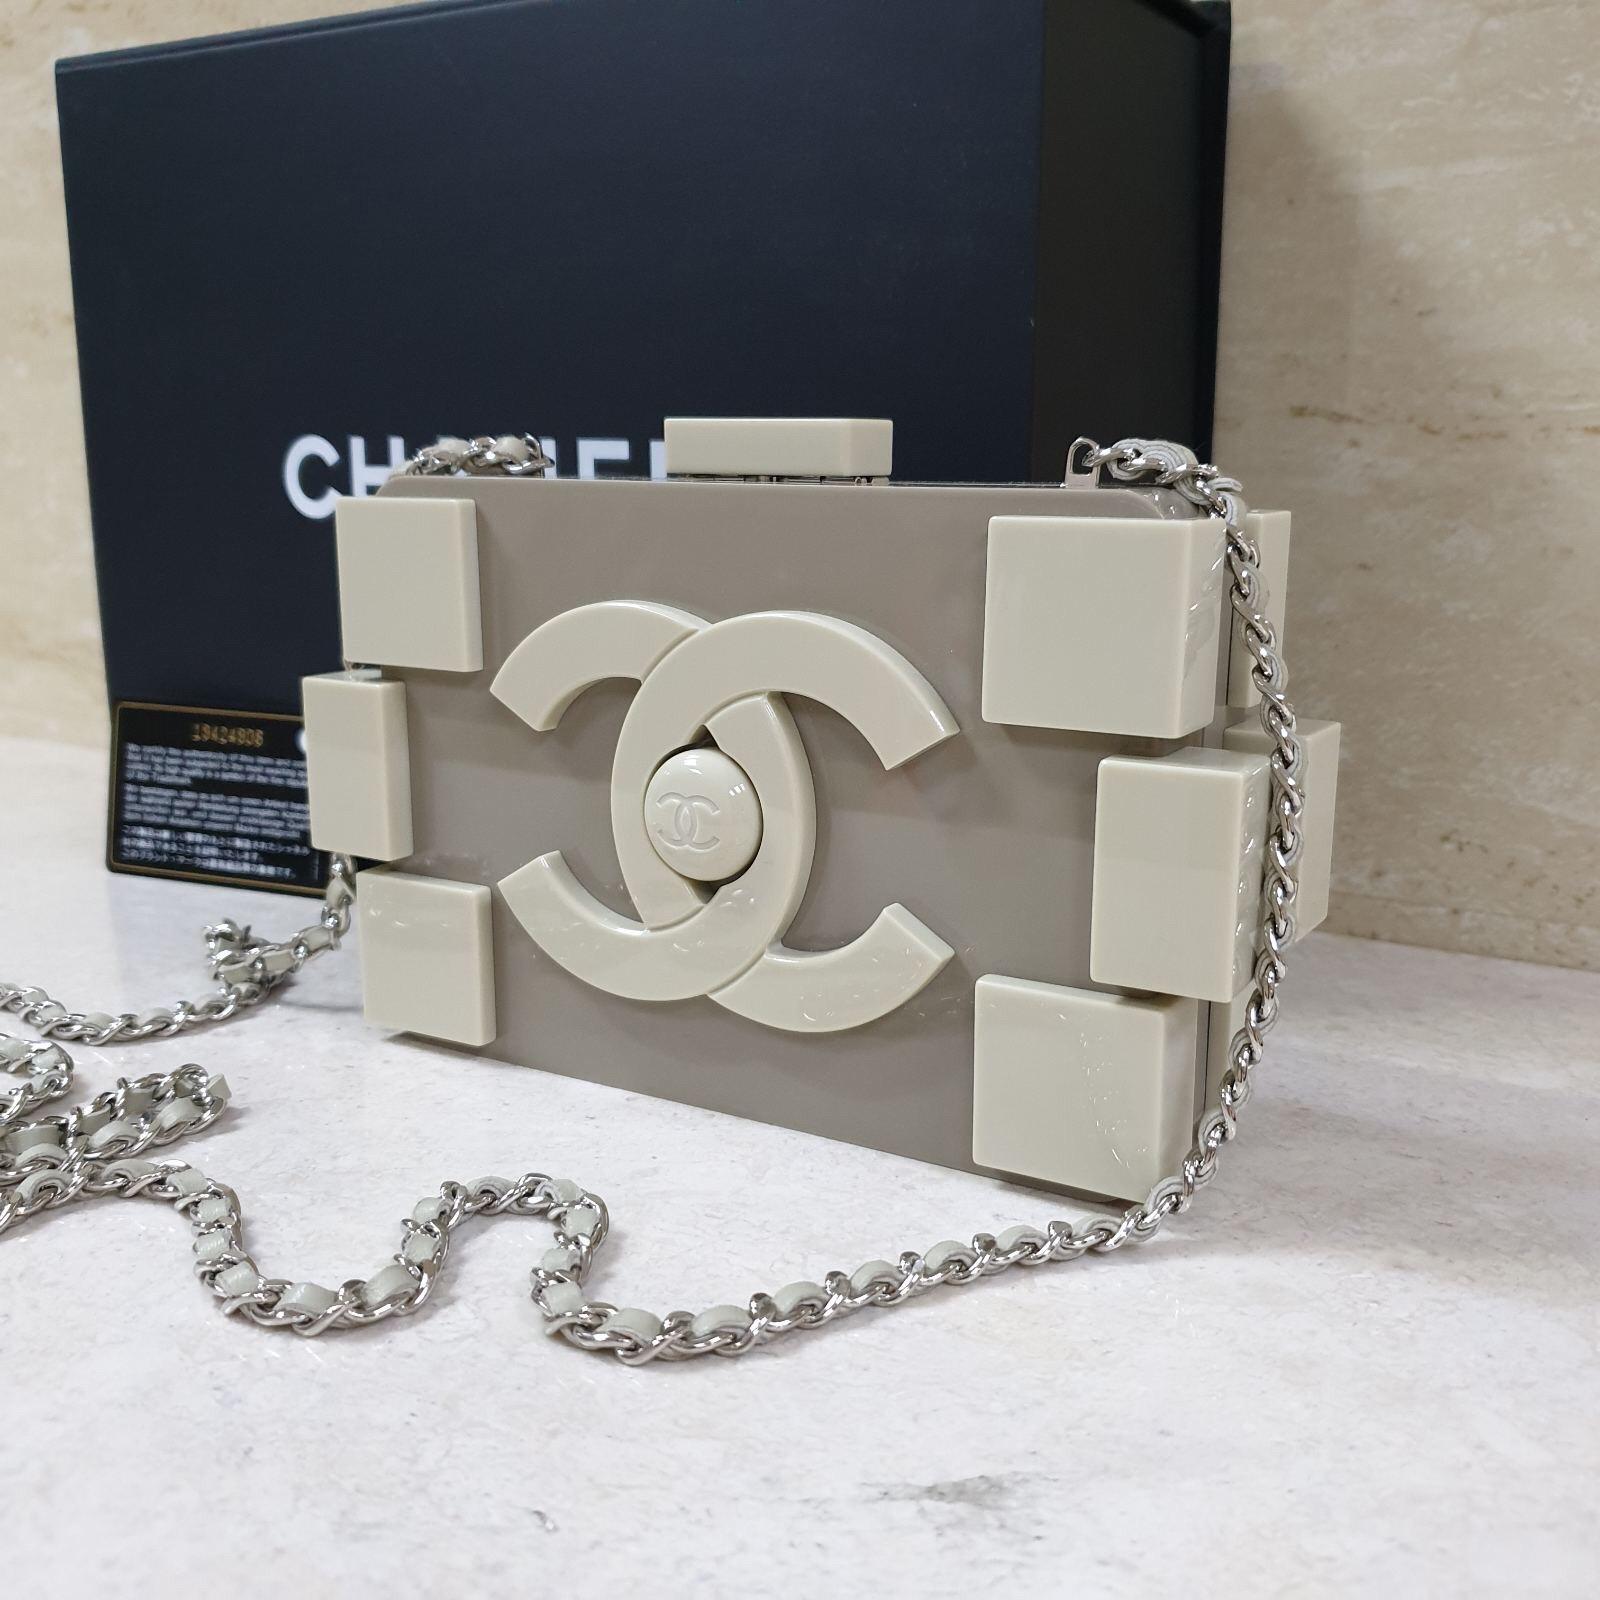 Get your hands on this truly exclusive handbag by Chanel. This Lego Brique bag is made from plexiglass, making it durable, chic and elegant. The beige color makes it super fabulous. This bag is versatile; it can be worn during nights out on the town